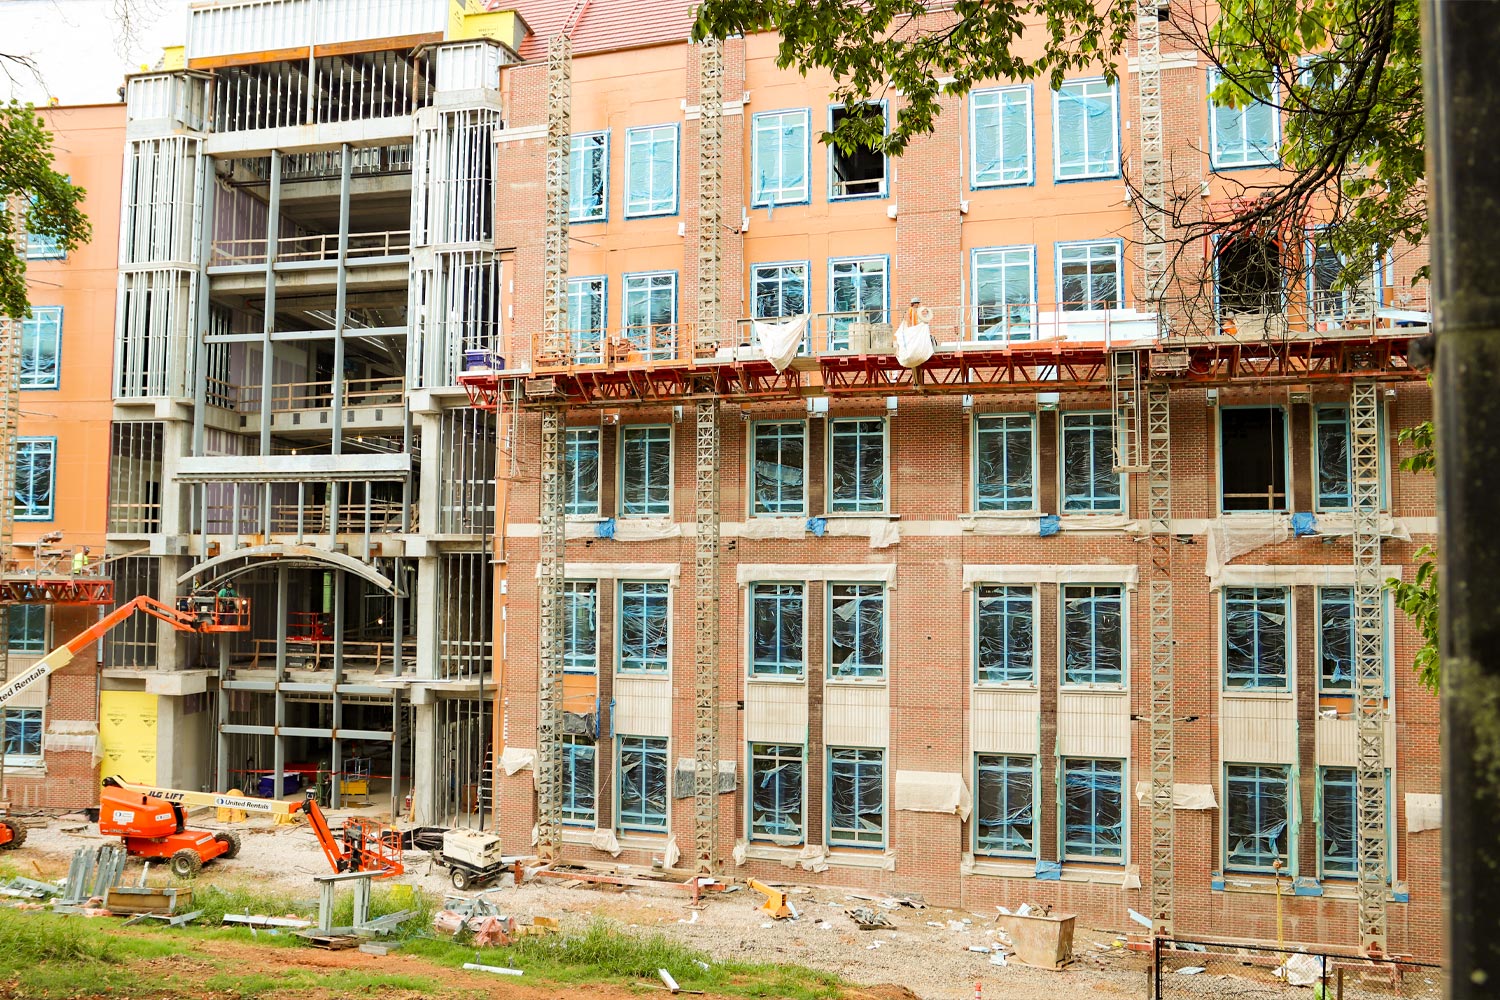 Workers add the elegant brick exterior to the north side of the new building. This area will be home to first-year studies and the college administration.